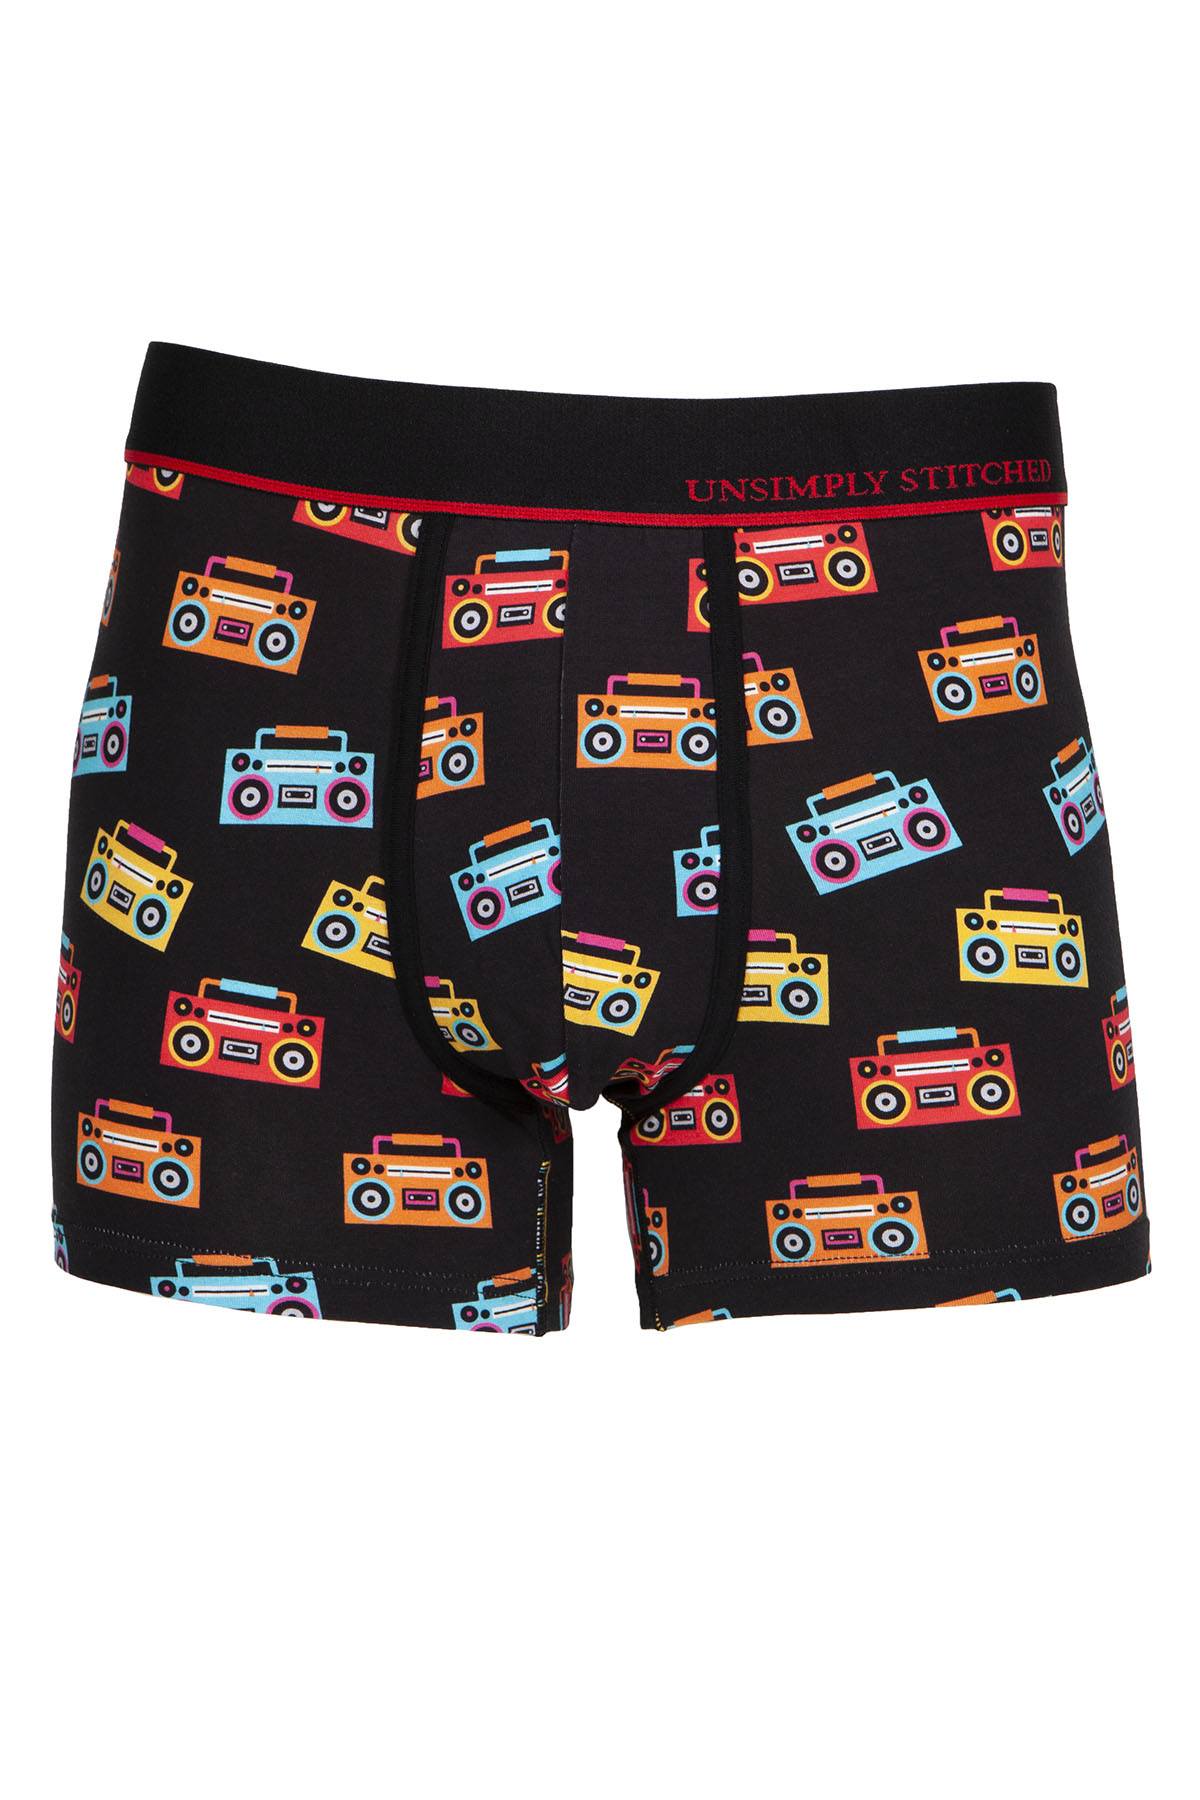 Unsimply Stitched Black Boombox Trunk